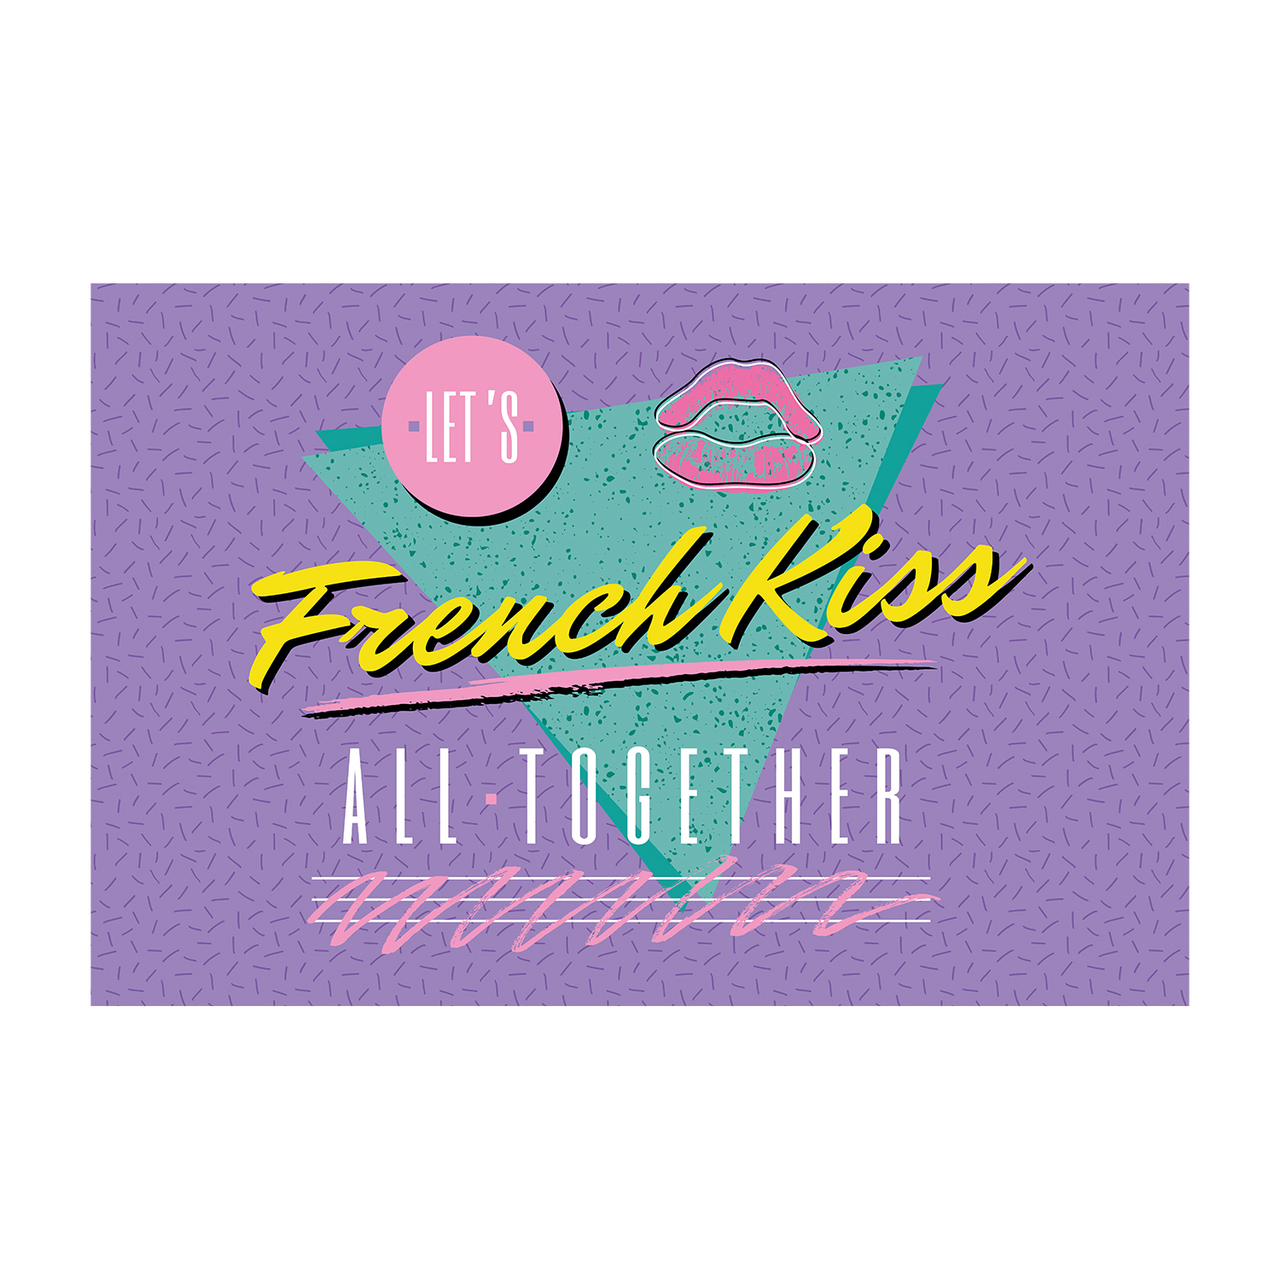 T-SHIRT LET'S FRENCH KISS ALL TOGETHER